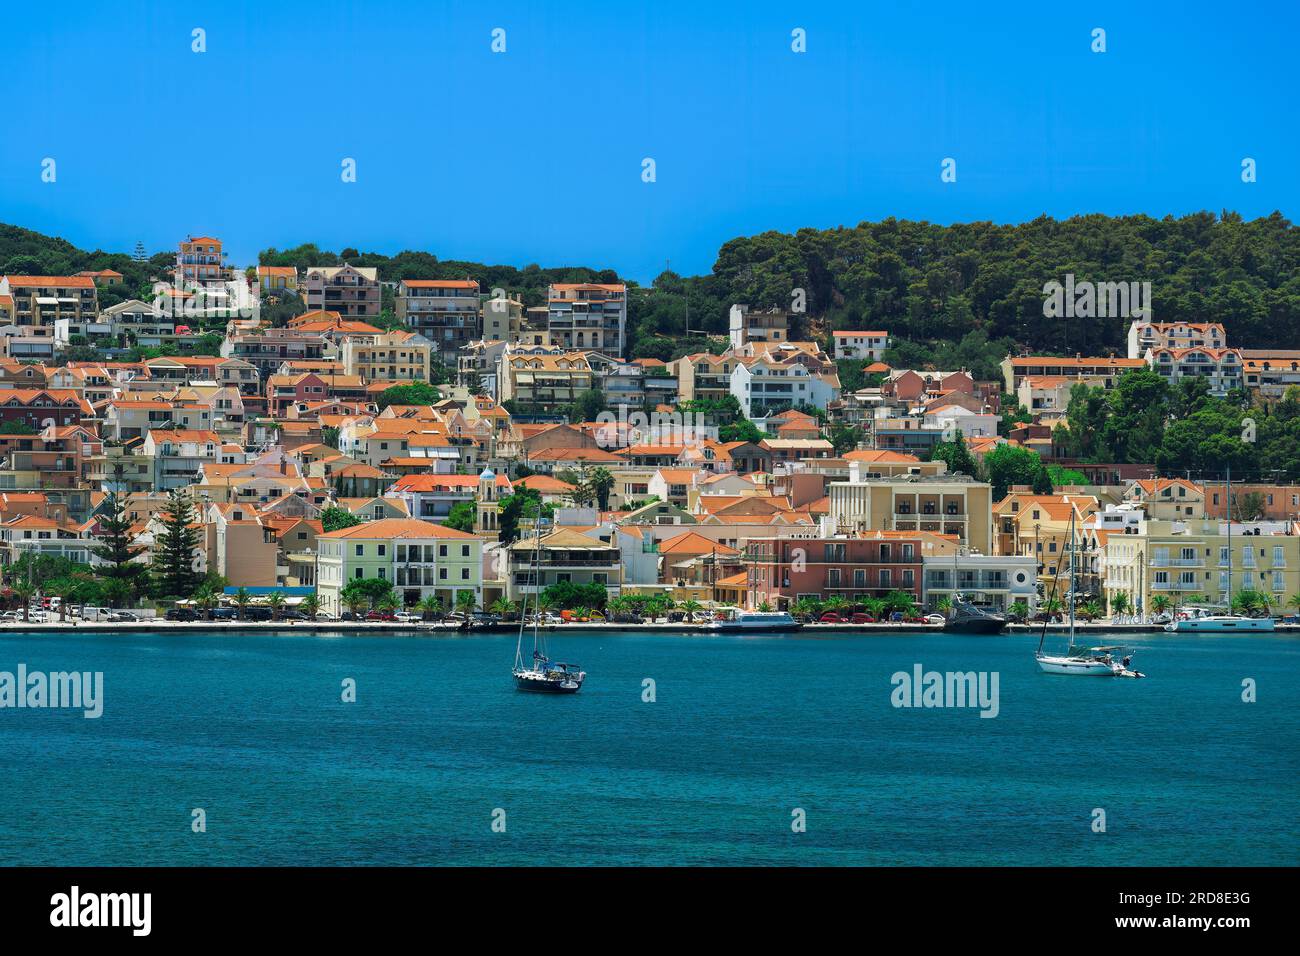 Town seafront panorama with low-rise buildings, Argostoli, Cephalonia Ionia Islands, Greek Islands, Greece, Europe Stock Photo